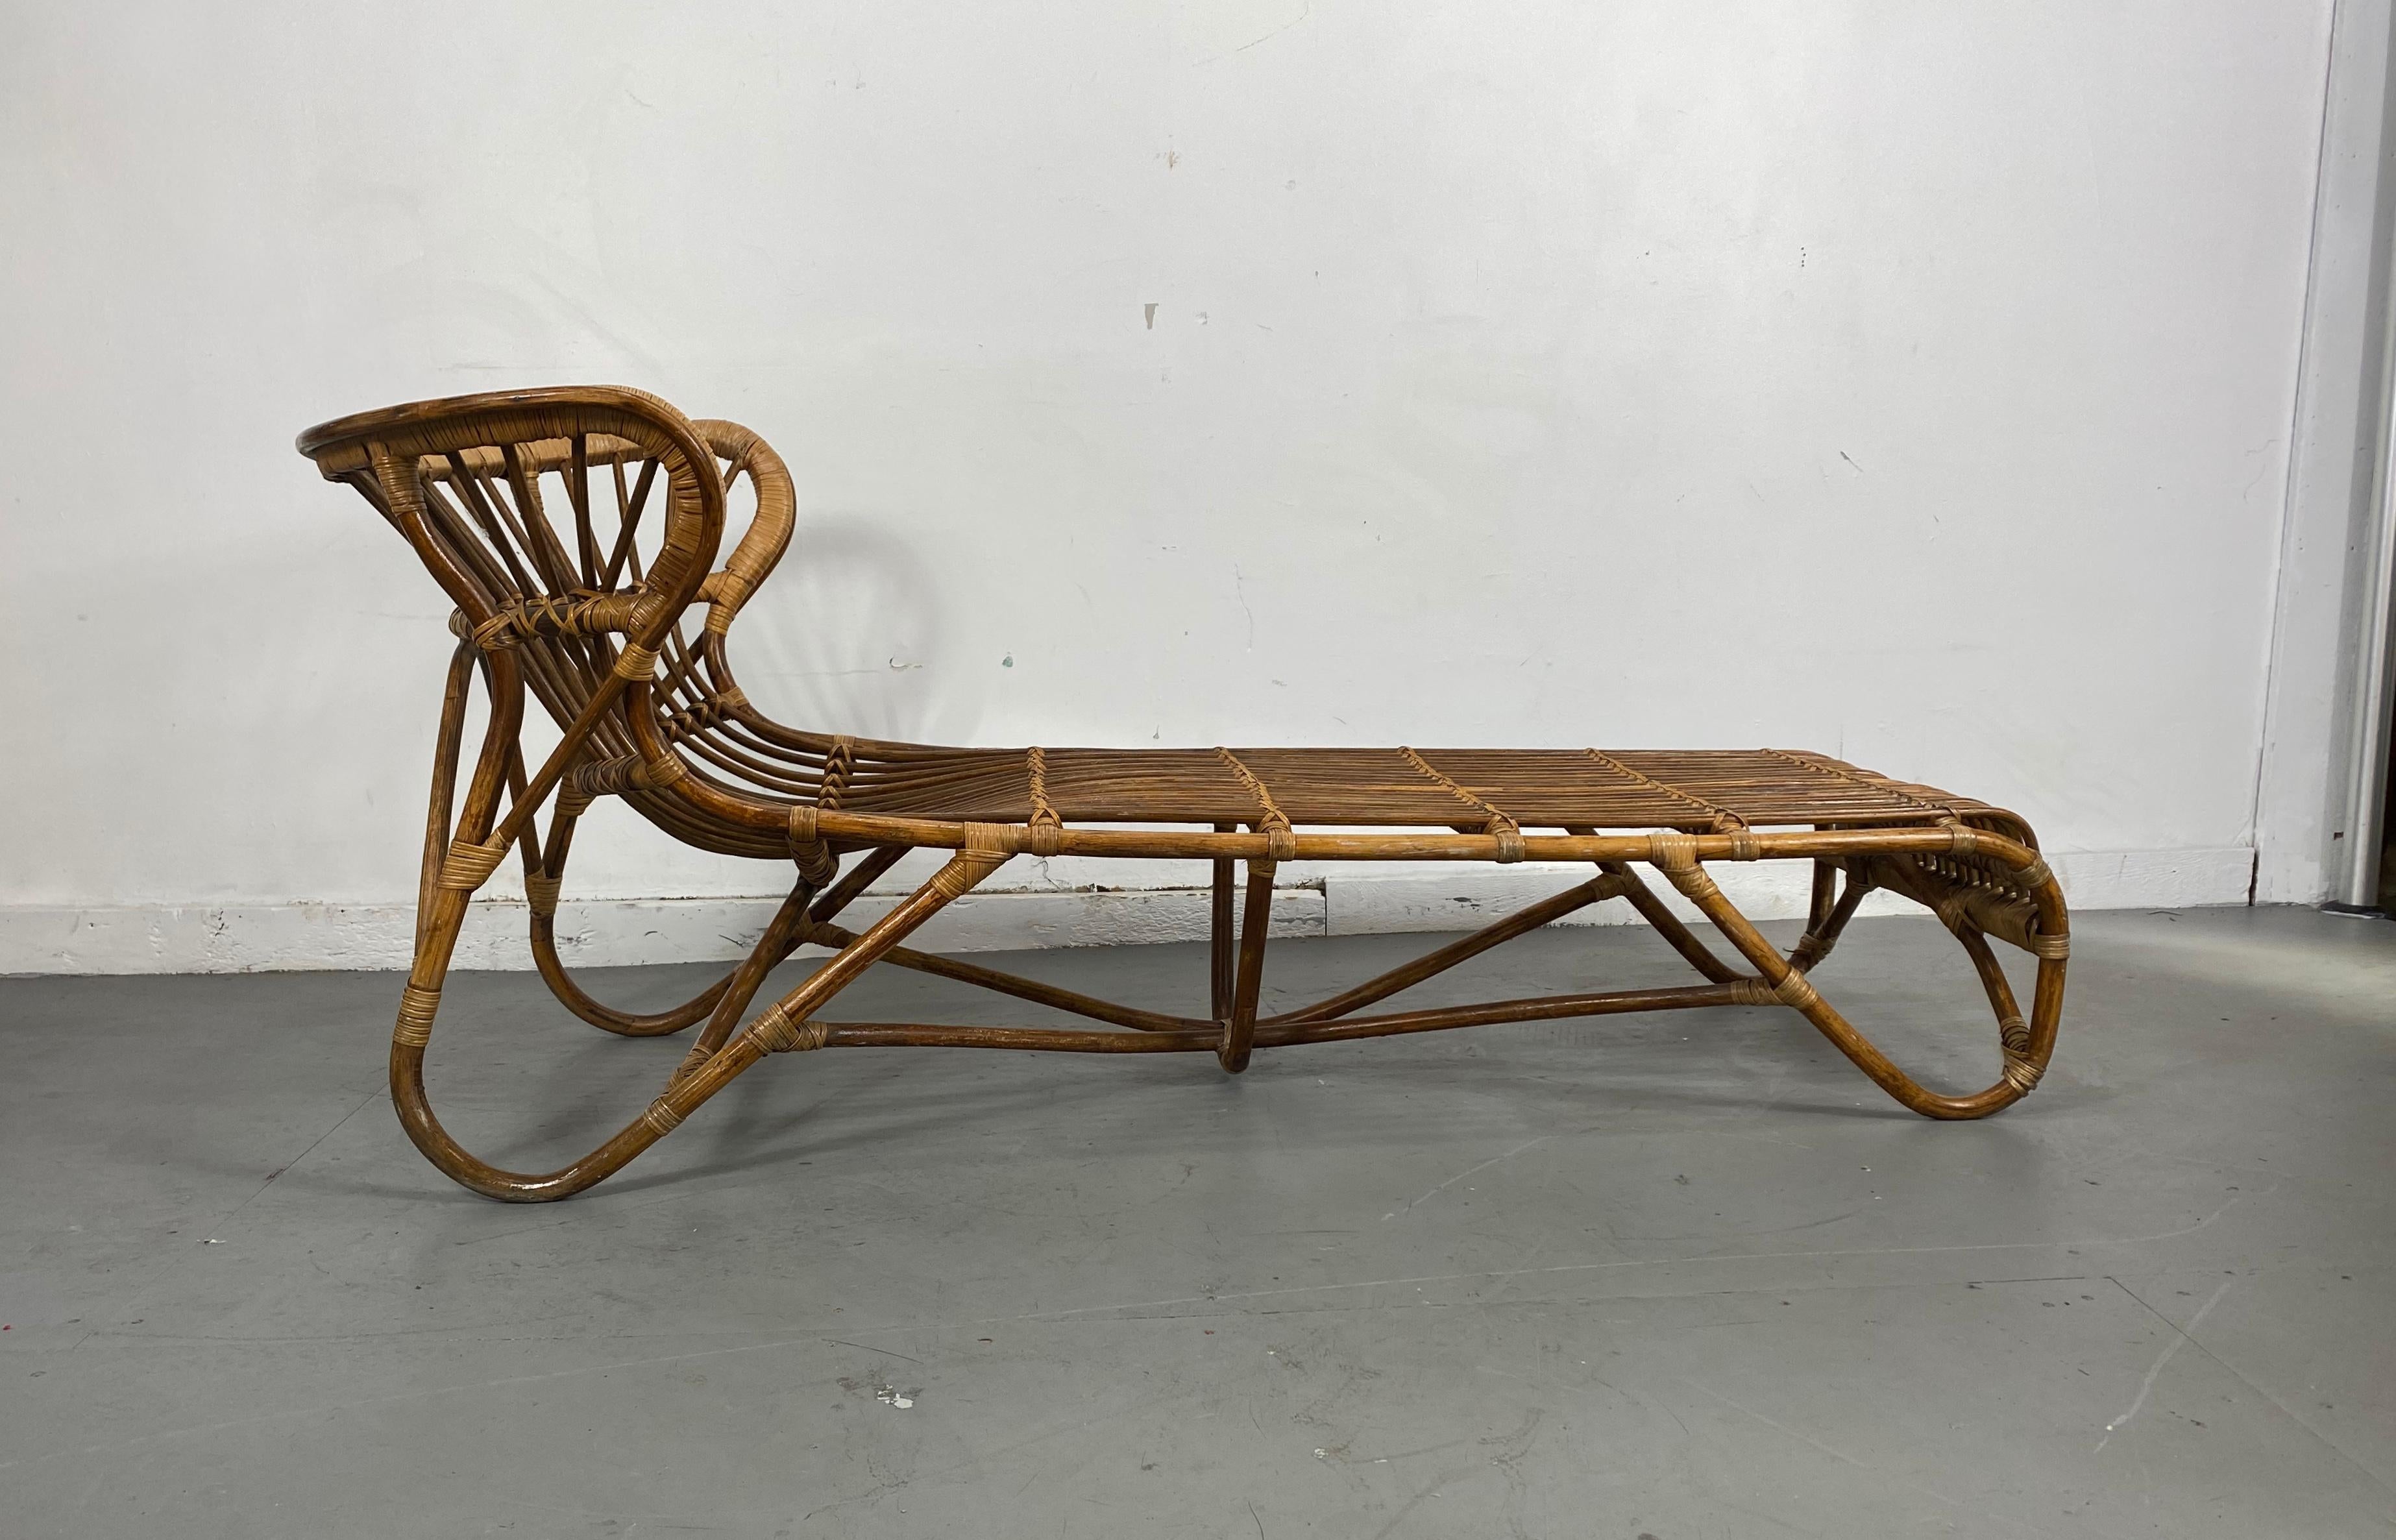 Rattan and bamboo chaise lounge chair designed in the 1960s. Amazing original condition. Hand delivery avail to New York City or anywhere en route from Buffalo NY.